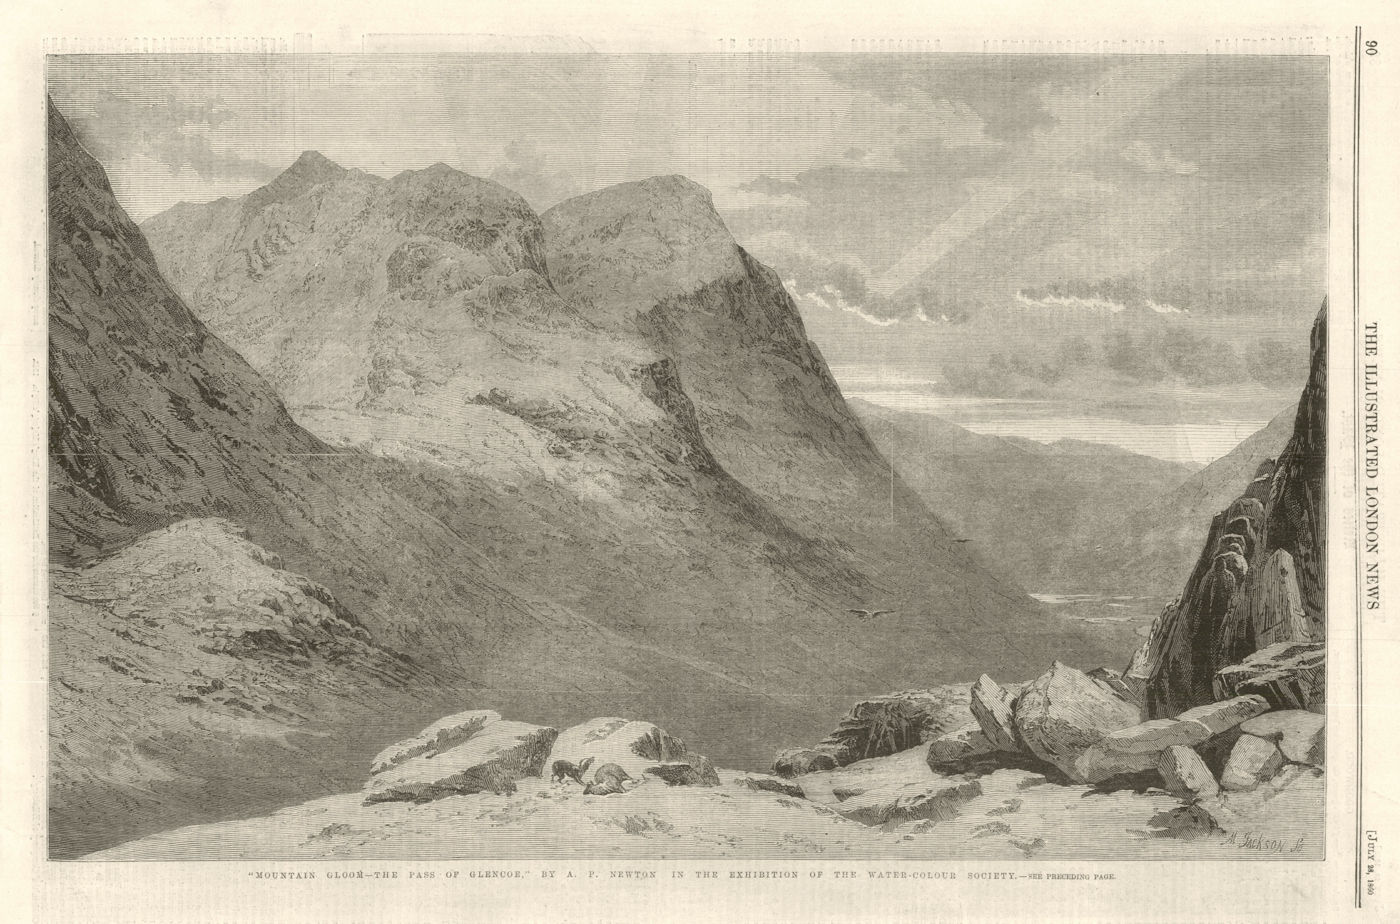 Associate Product " Mountain Gloom: The pass of Glencoe " the water-colour Society. Scotland 1860